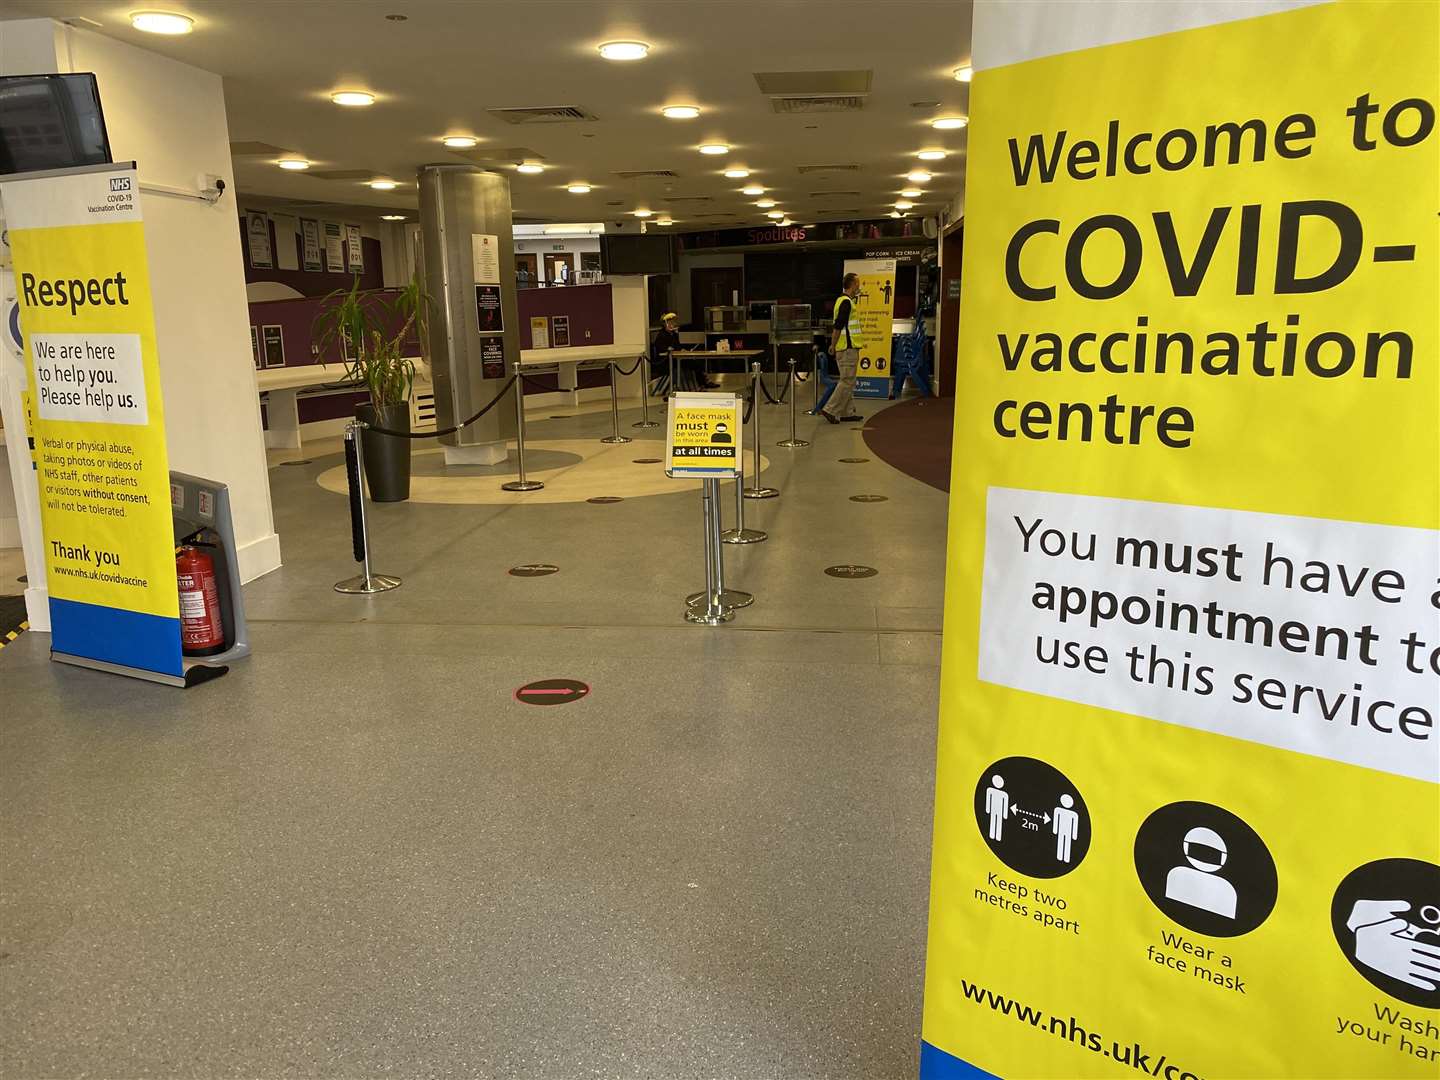 The Covid vaccination centre at Gravesend's Woodville theatre is to shut in the coming weeks